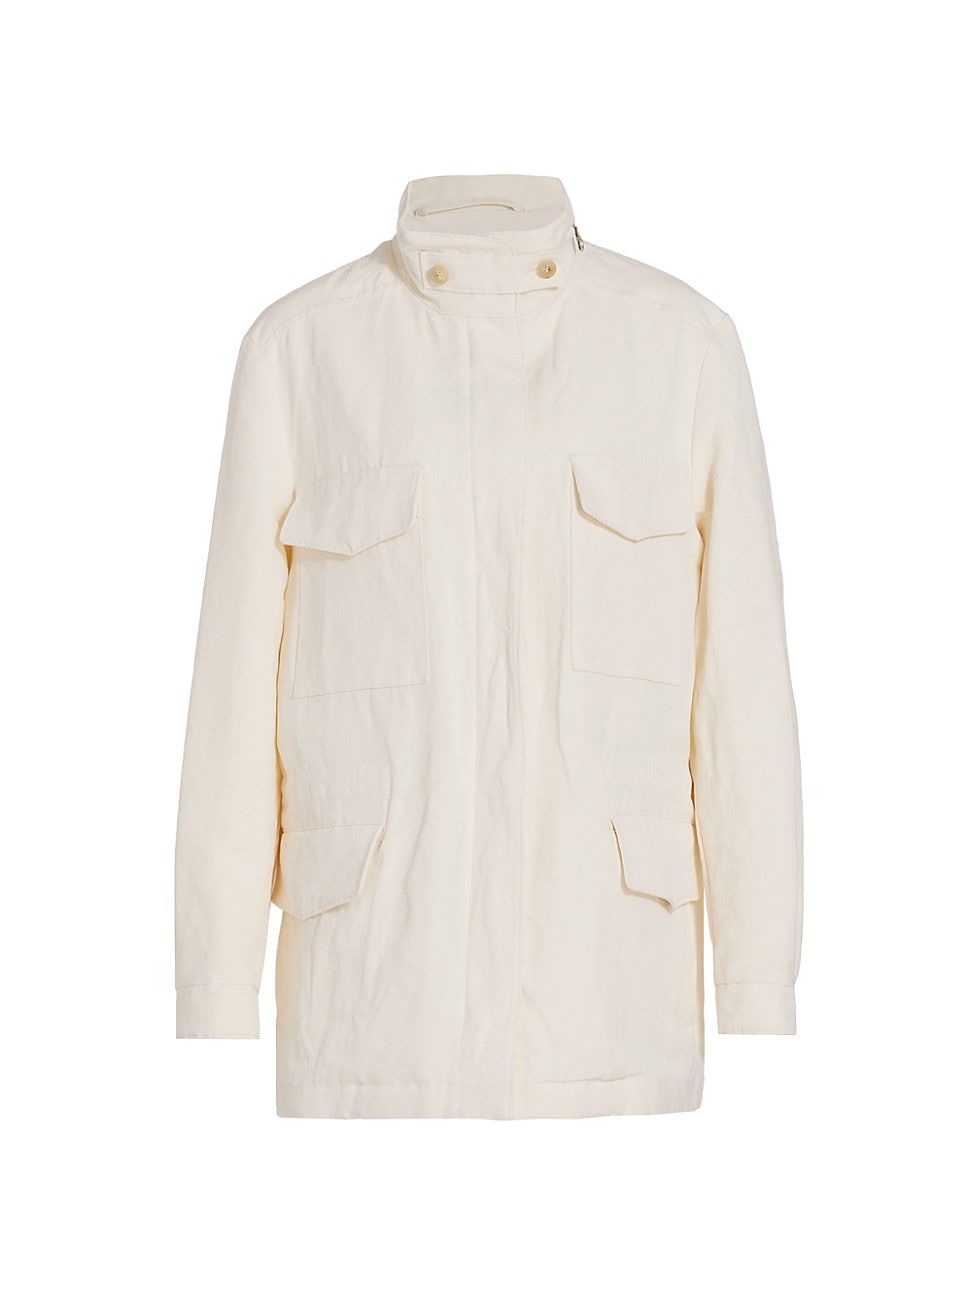 Women's Iconic Traveller Oversized Jacket - White - Size Small - White - Size Small | Saks Fifth Avenue